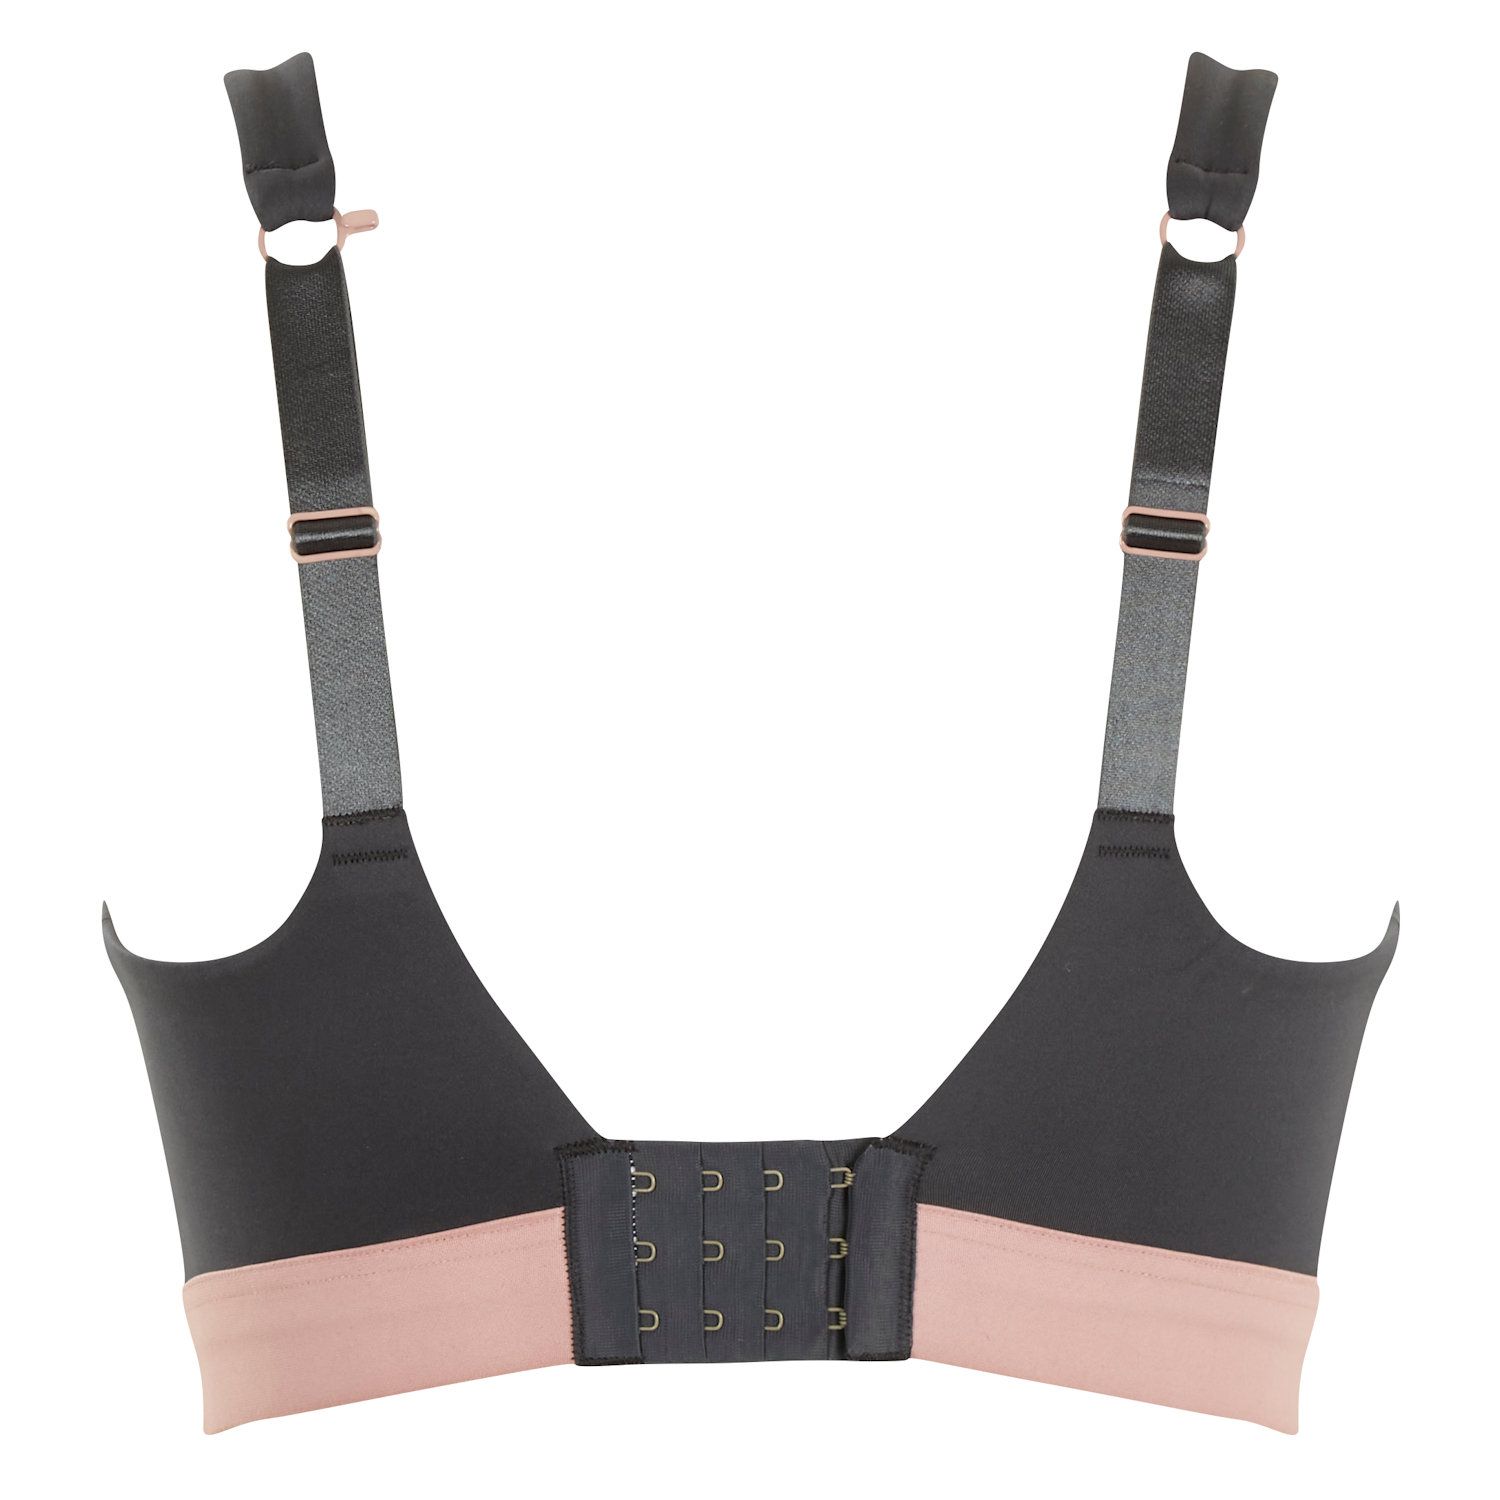 Breakout Bras - On the second Day of Giveaways Breakout Bras gave to me  a supportive and stylish sports bra by @panachesport for free! 💪💪💪Enter  to win one sports bra by Panache